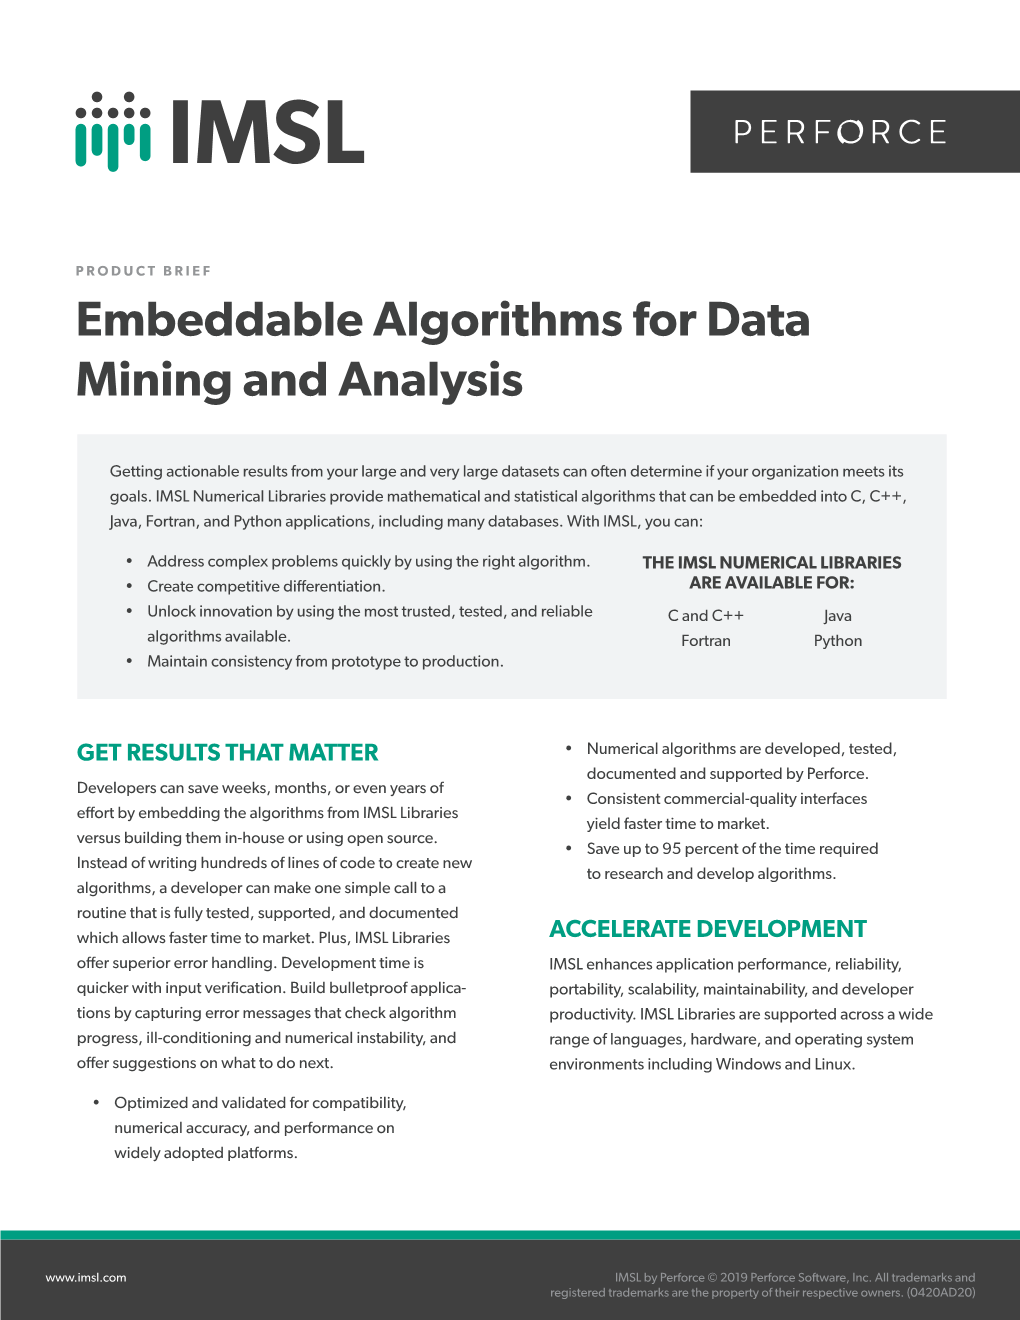 Embeddable Algorithms for Data Mining and Analysis